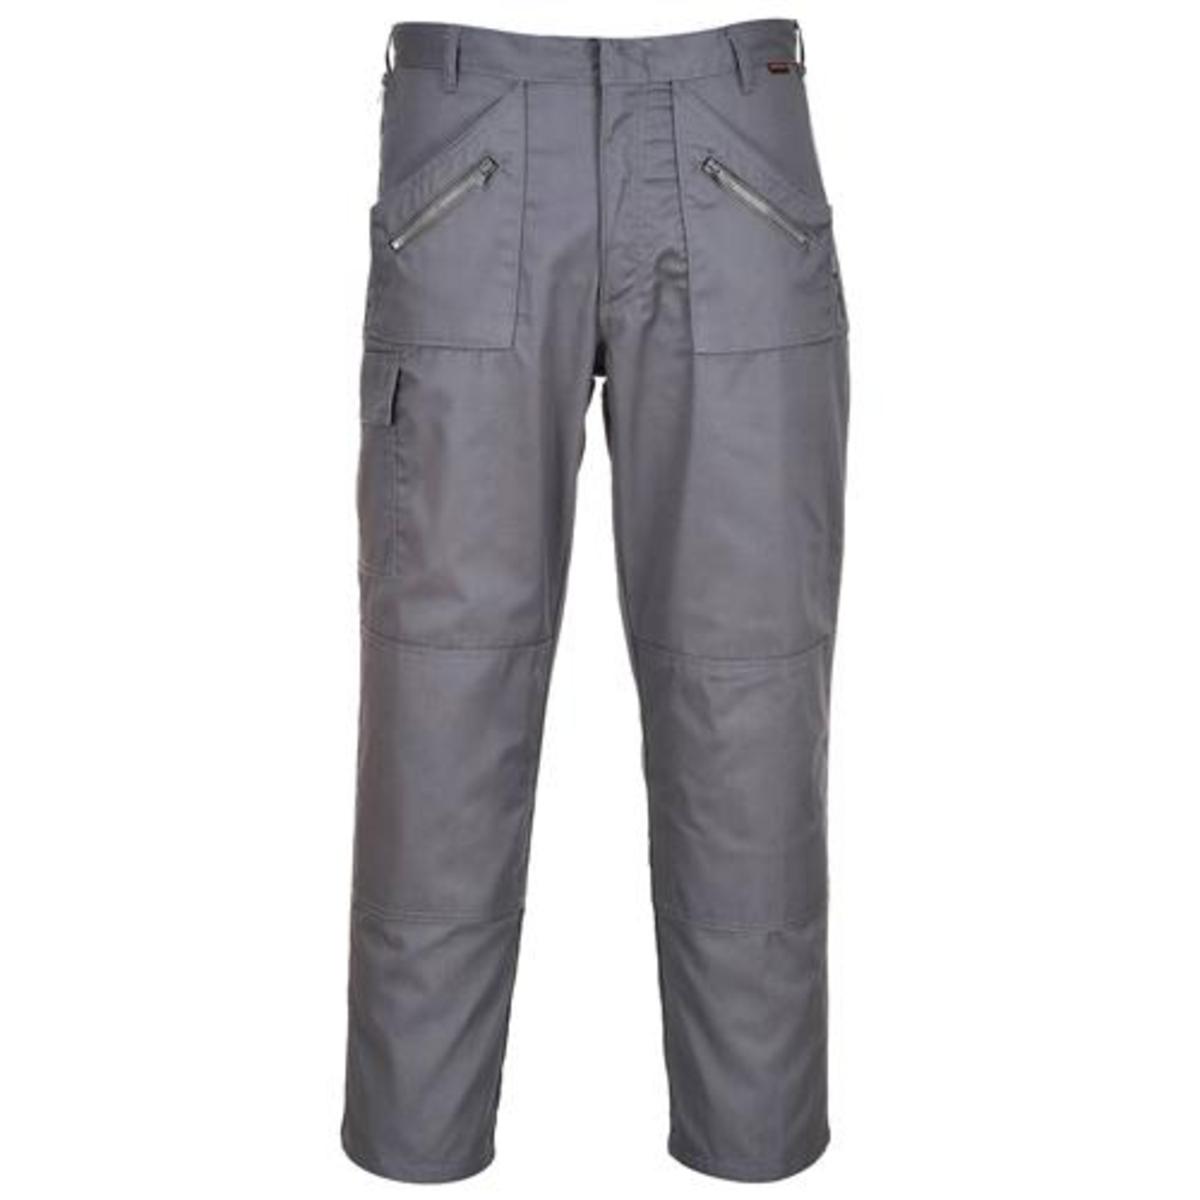 Action Cargo Work Trousers with Knee pad Pockets Mutli Pocket Trousers Portwest 